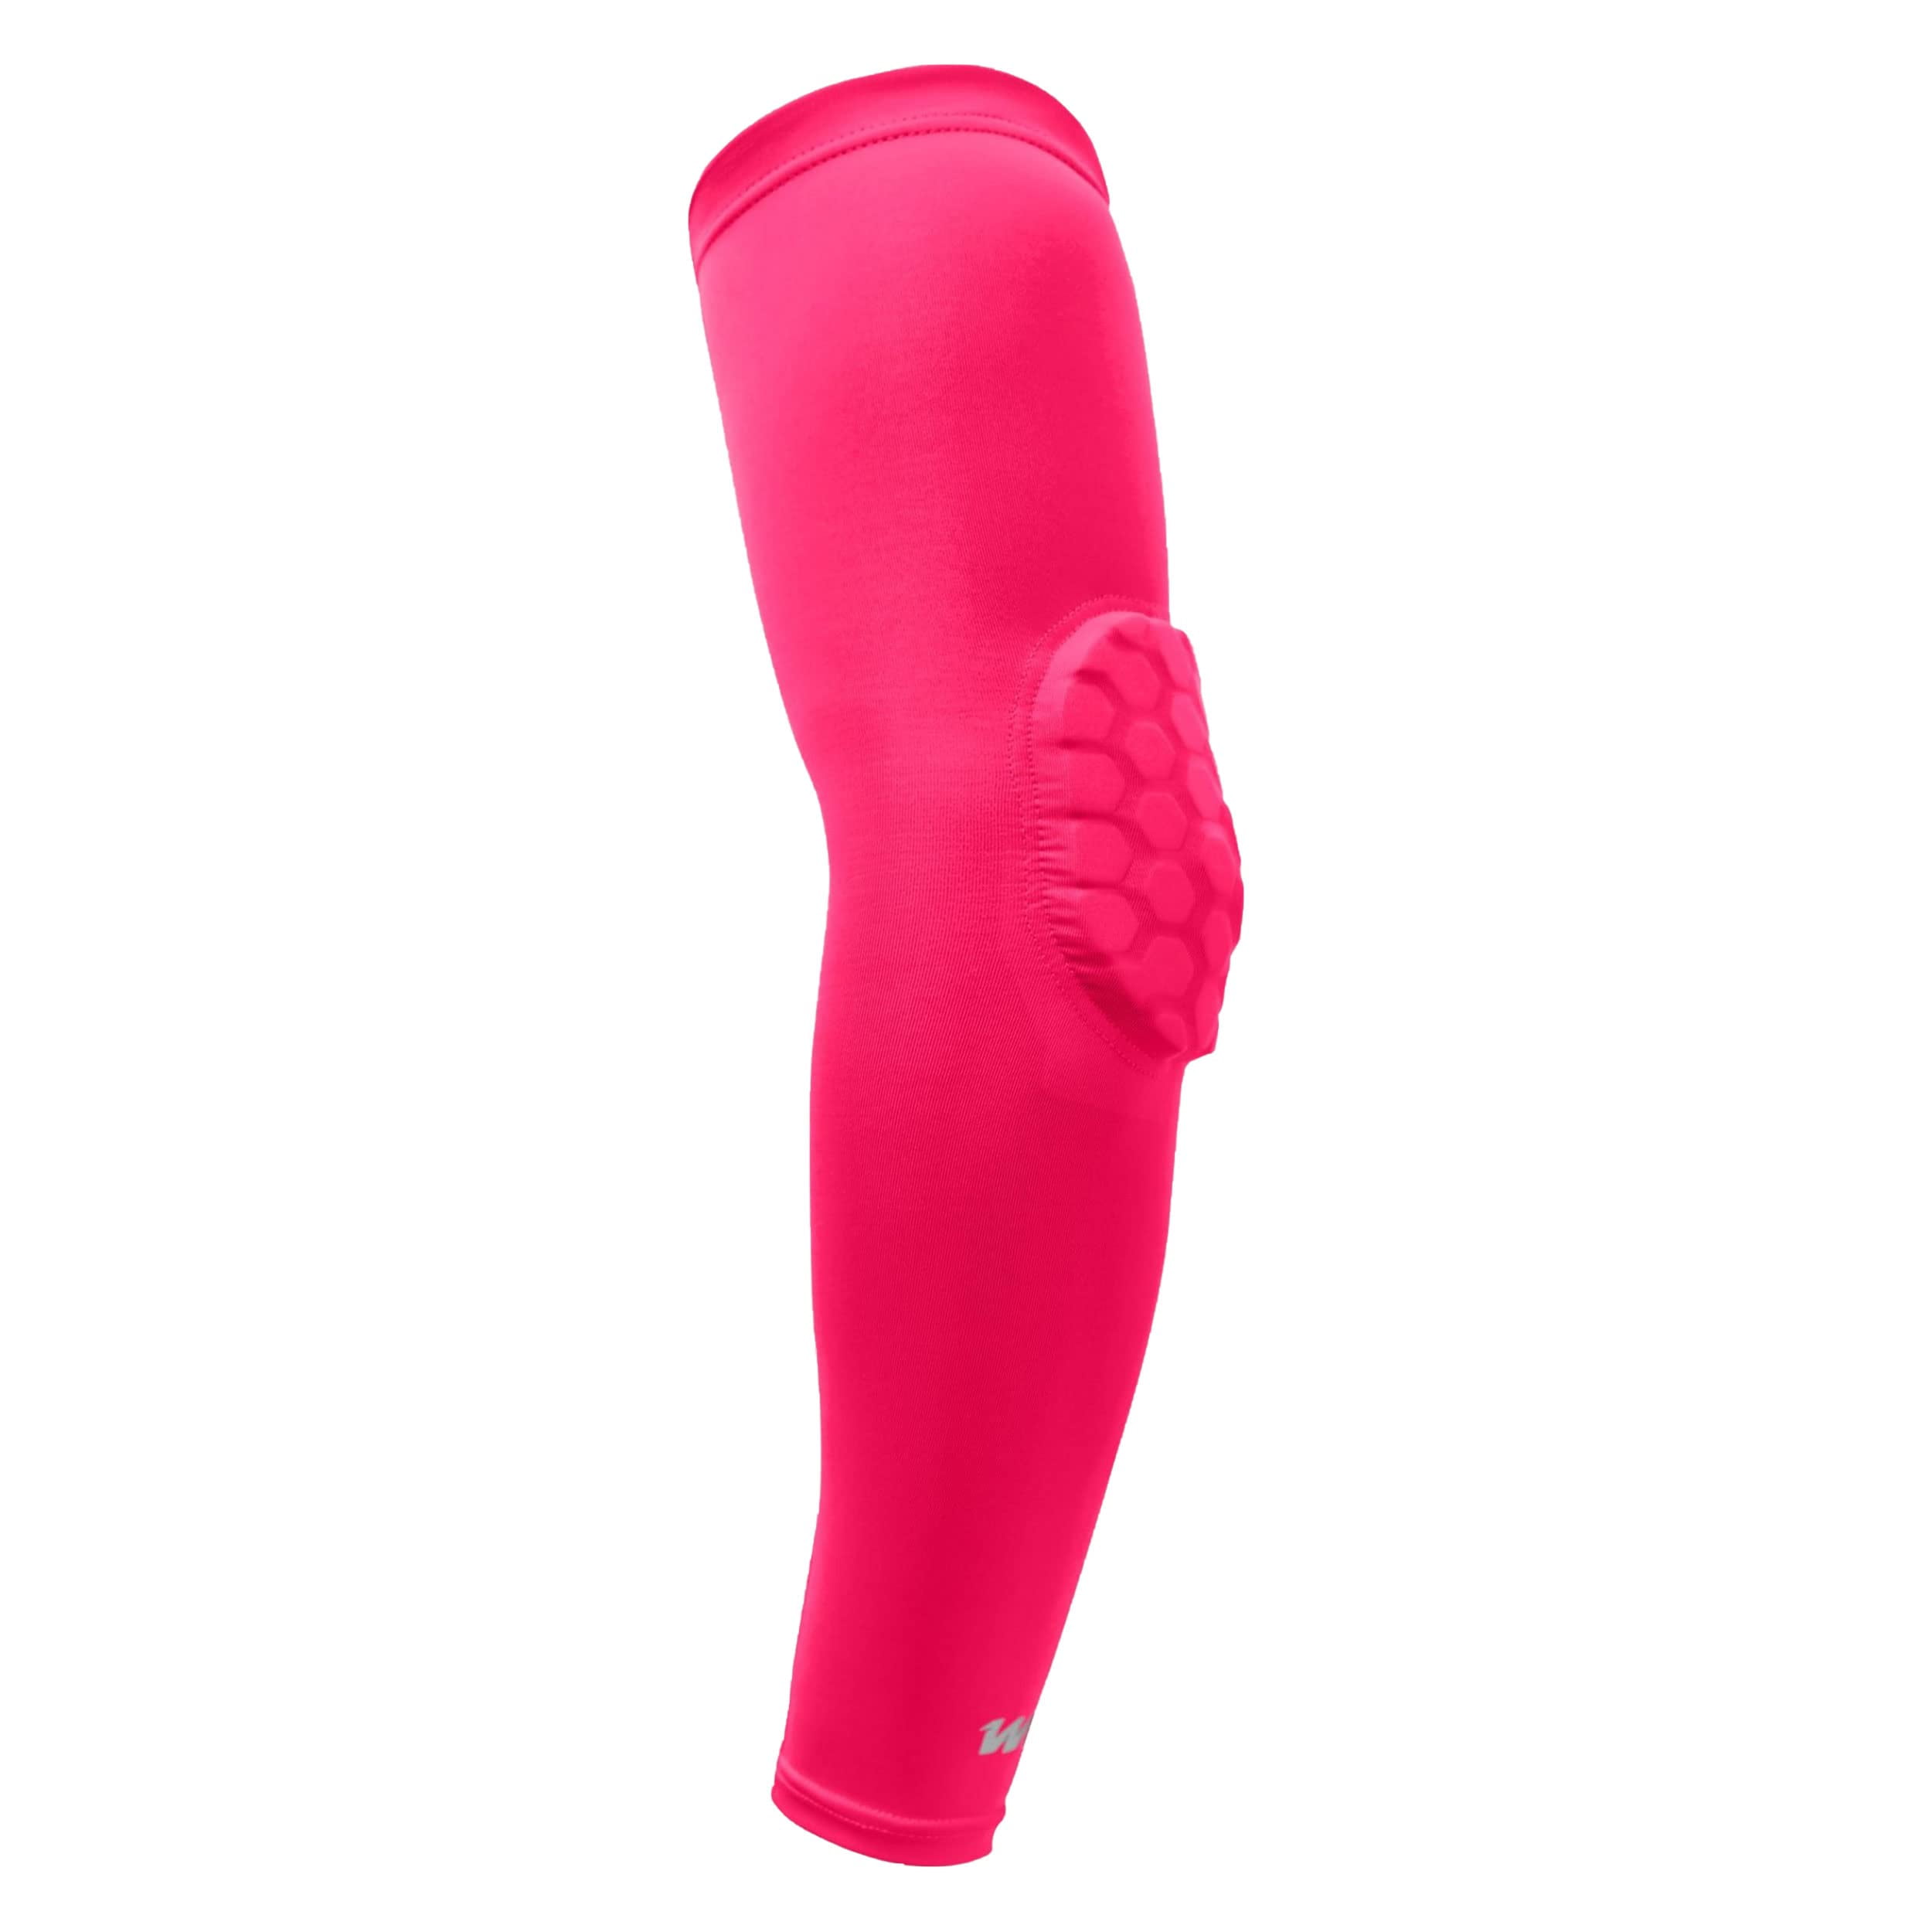 We Ball Sports Compression Padded Arm Sleeve - Cooling, Moisture Wicking,  Breathable For Basketball, Football, Baseball (Pink, S) 